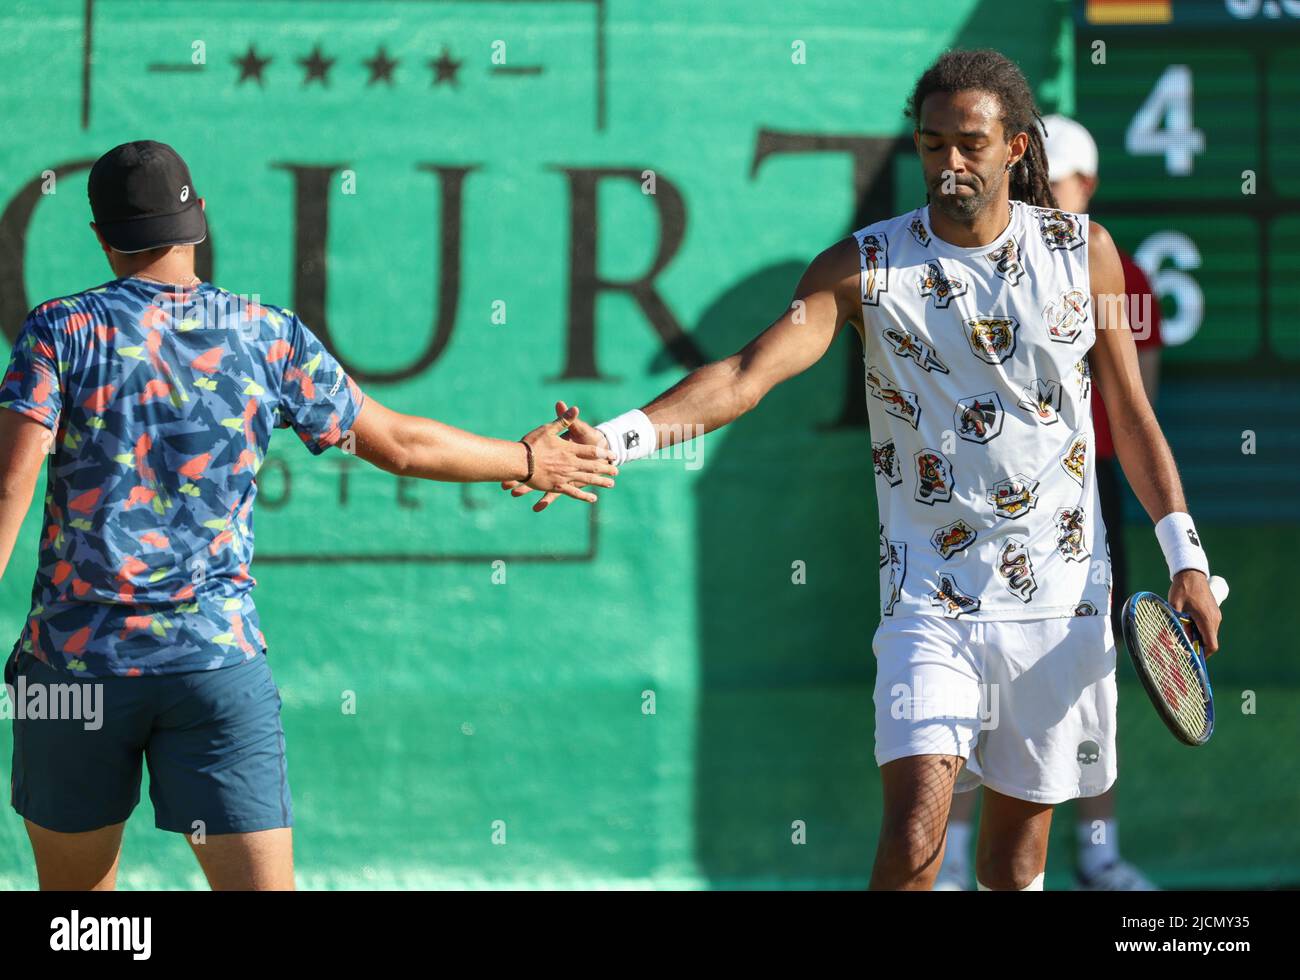 Halle, Germany. 14th June, 2022. Tennis: ATP Tour doubles, men, 1st round,  Hanfmann and Struff (Germany) - Stricker and Brown (Switzerland/Jamaica). Dustin  Brown (l) and Dominic Stricker are on the court. Credit